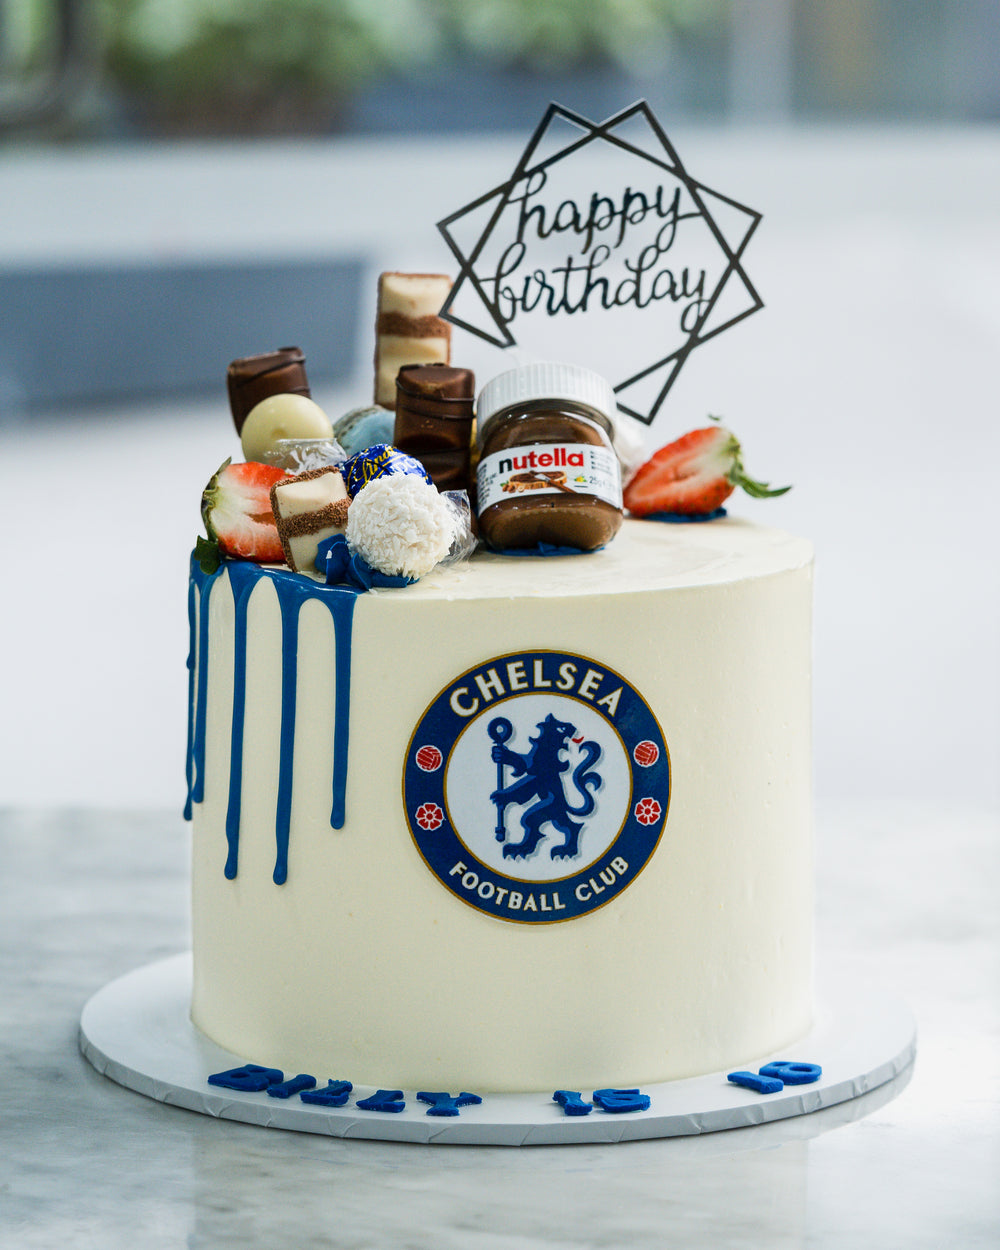 45 Awesome Football Birthday Cake Ideas : Blue and White Chelsea Cake +  Gold Flakes